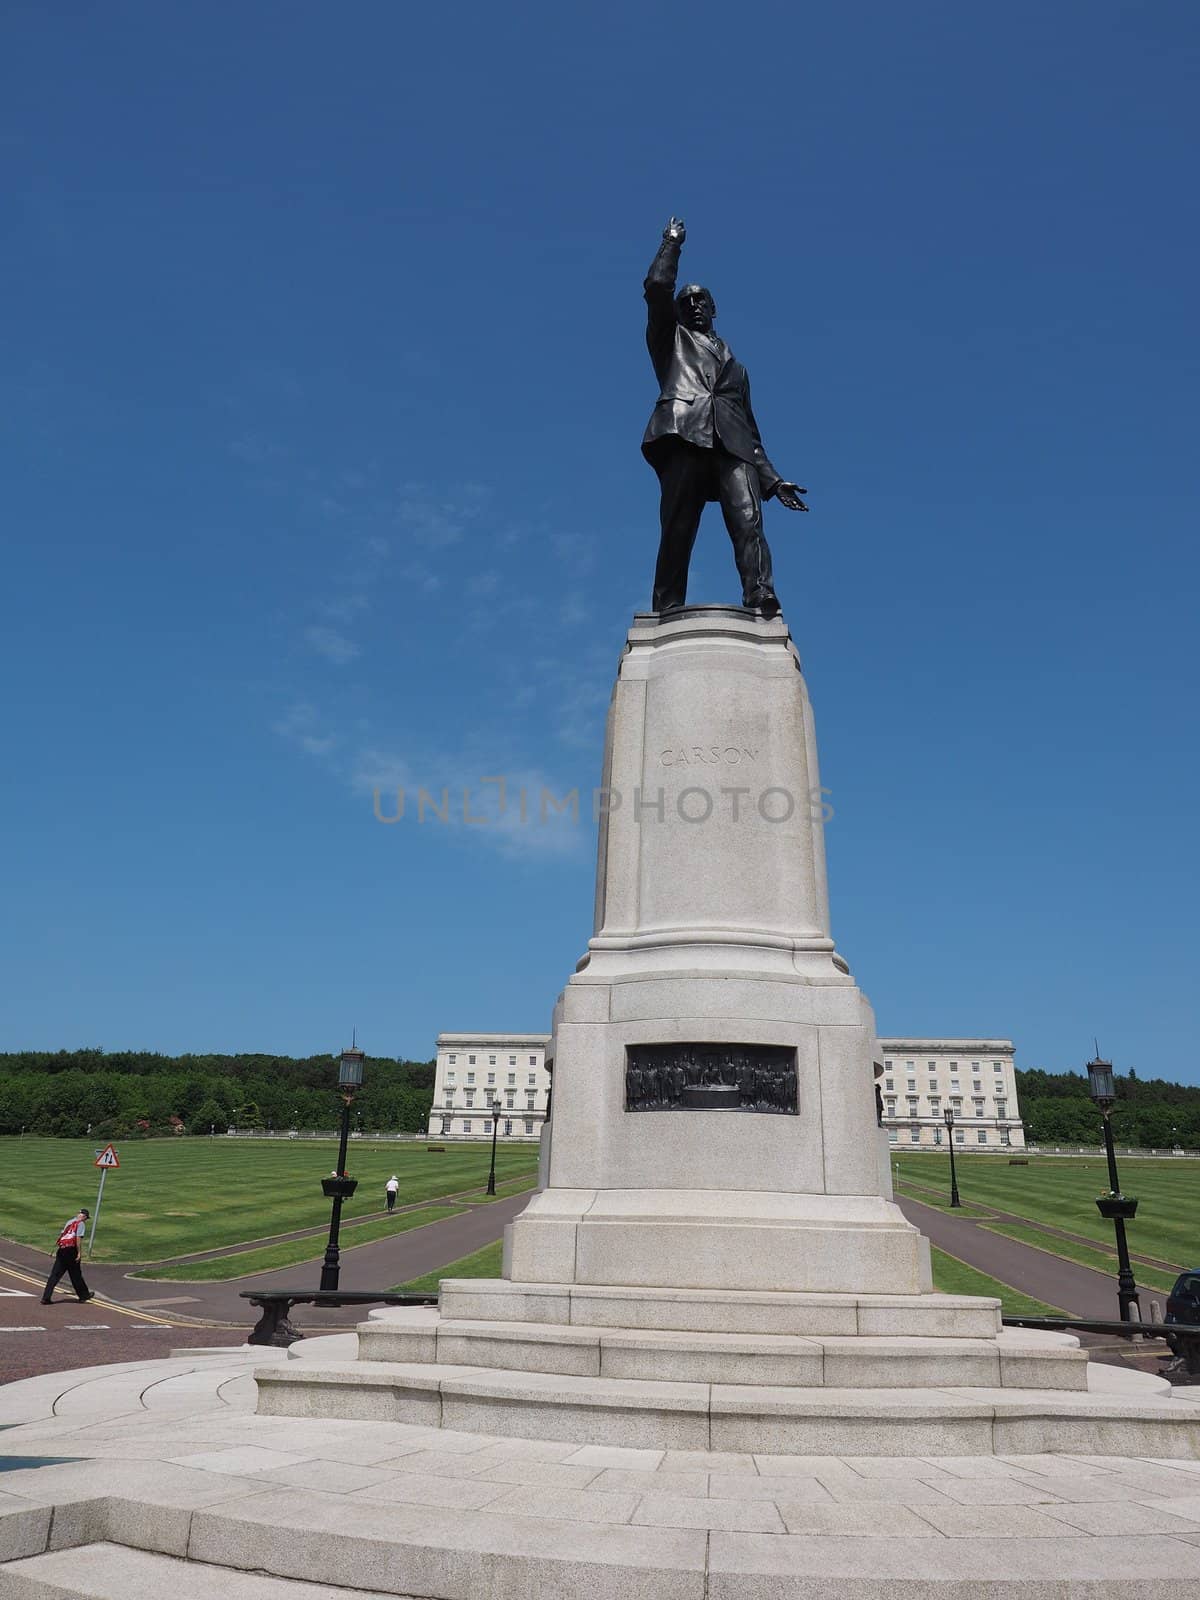 BELFAST, UK - CIRCA JUNE 2018: Lord Carson statue in front of Stormont Parliament